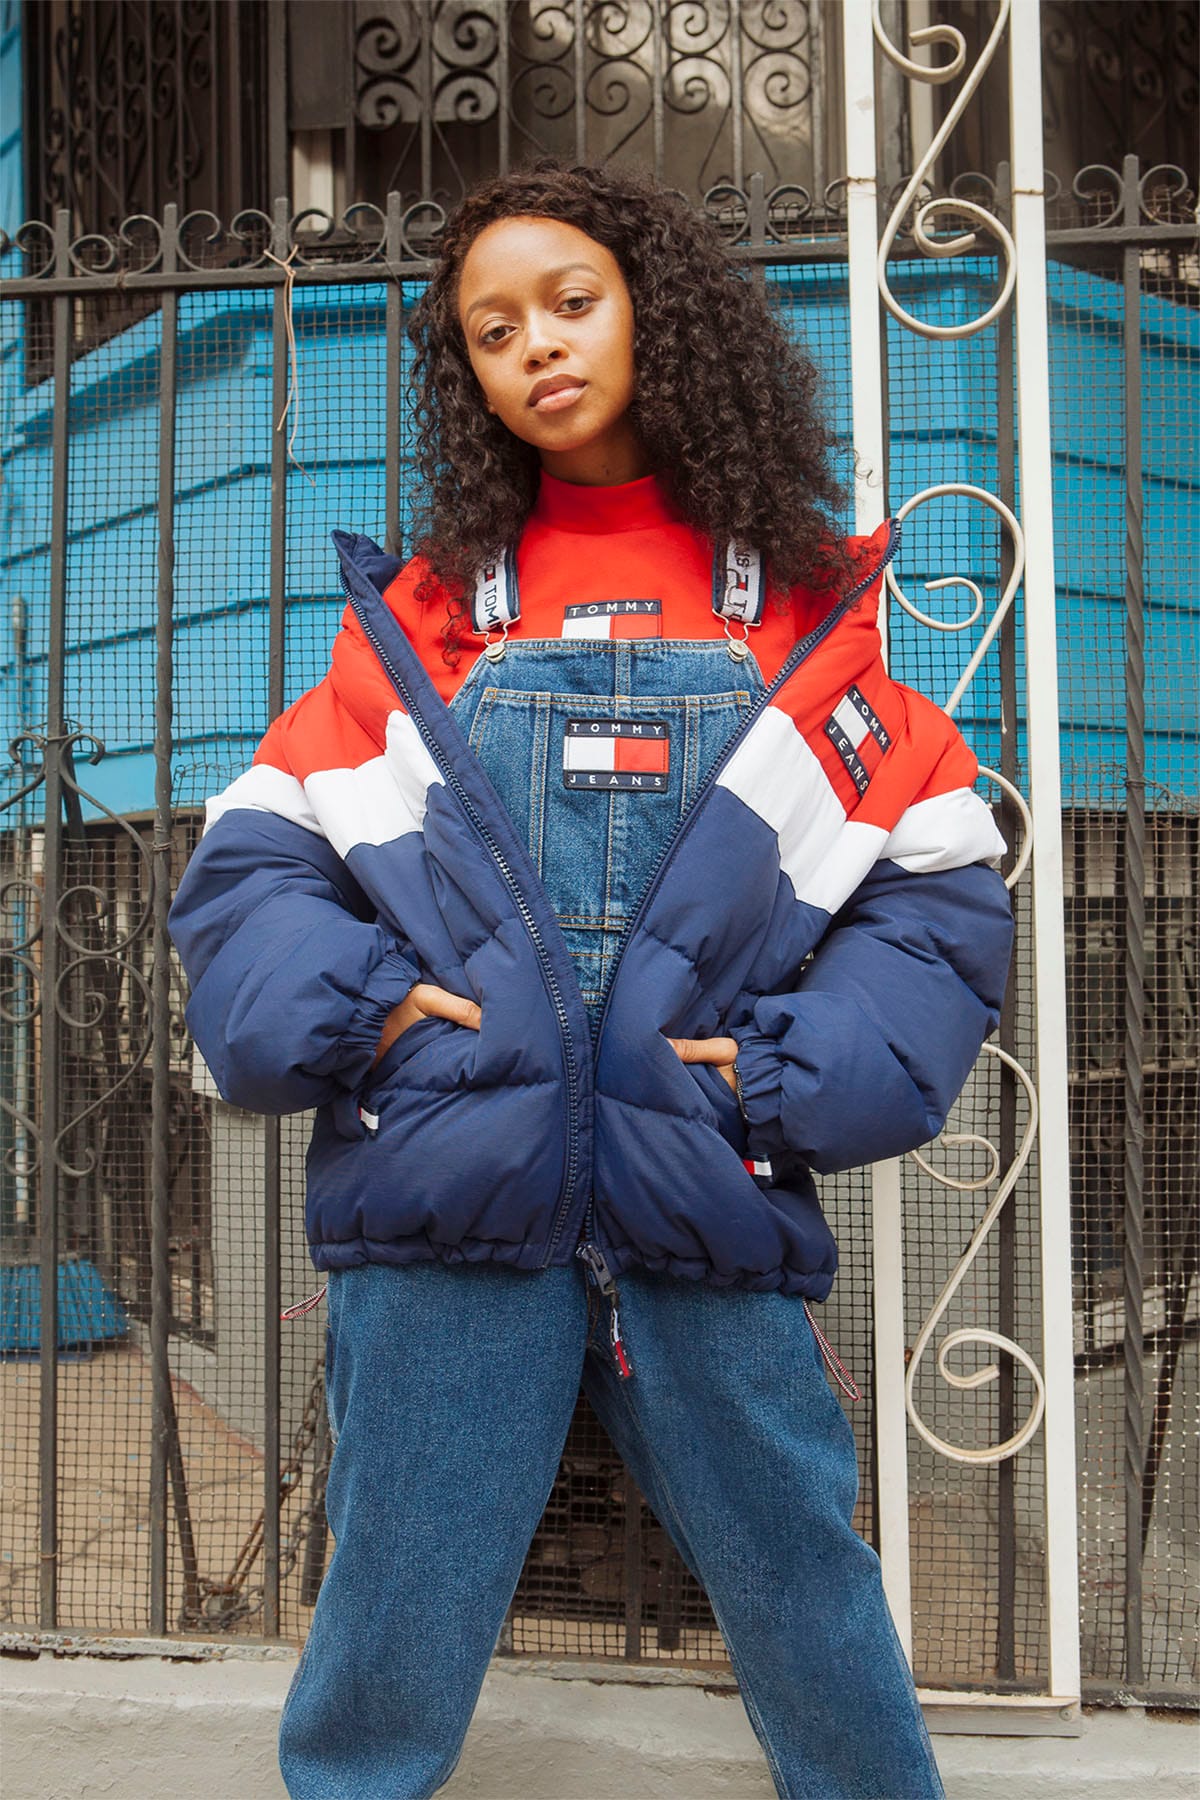 90's tommy hilfiger outfit